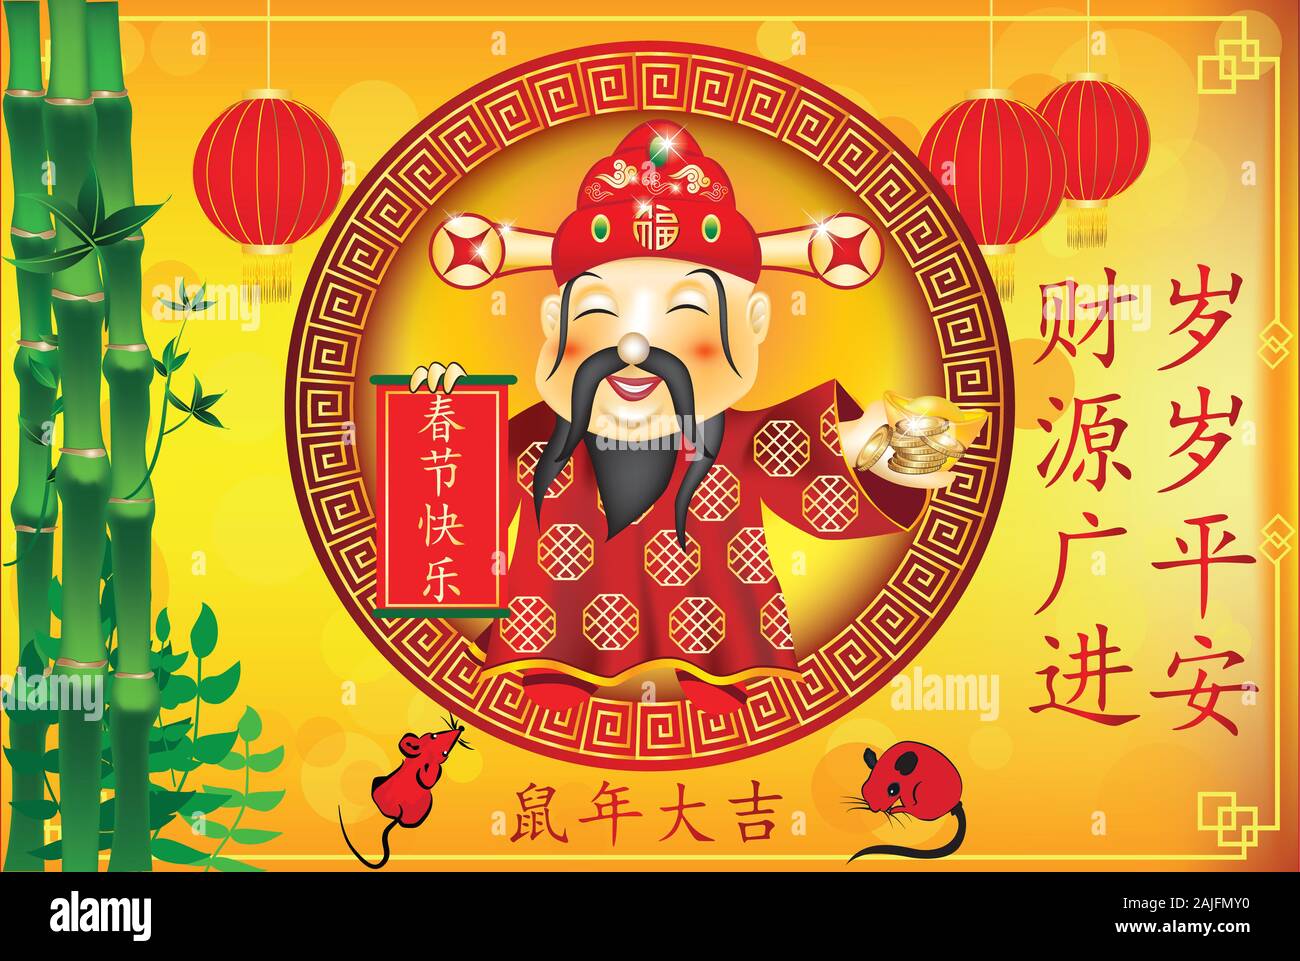 Prosperity wishes - Chinese New Year. Translation: May you have peace all year round. May your financial resources increase. Have an auspicious year. Stock Photo